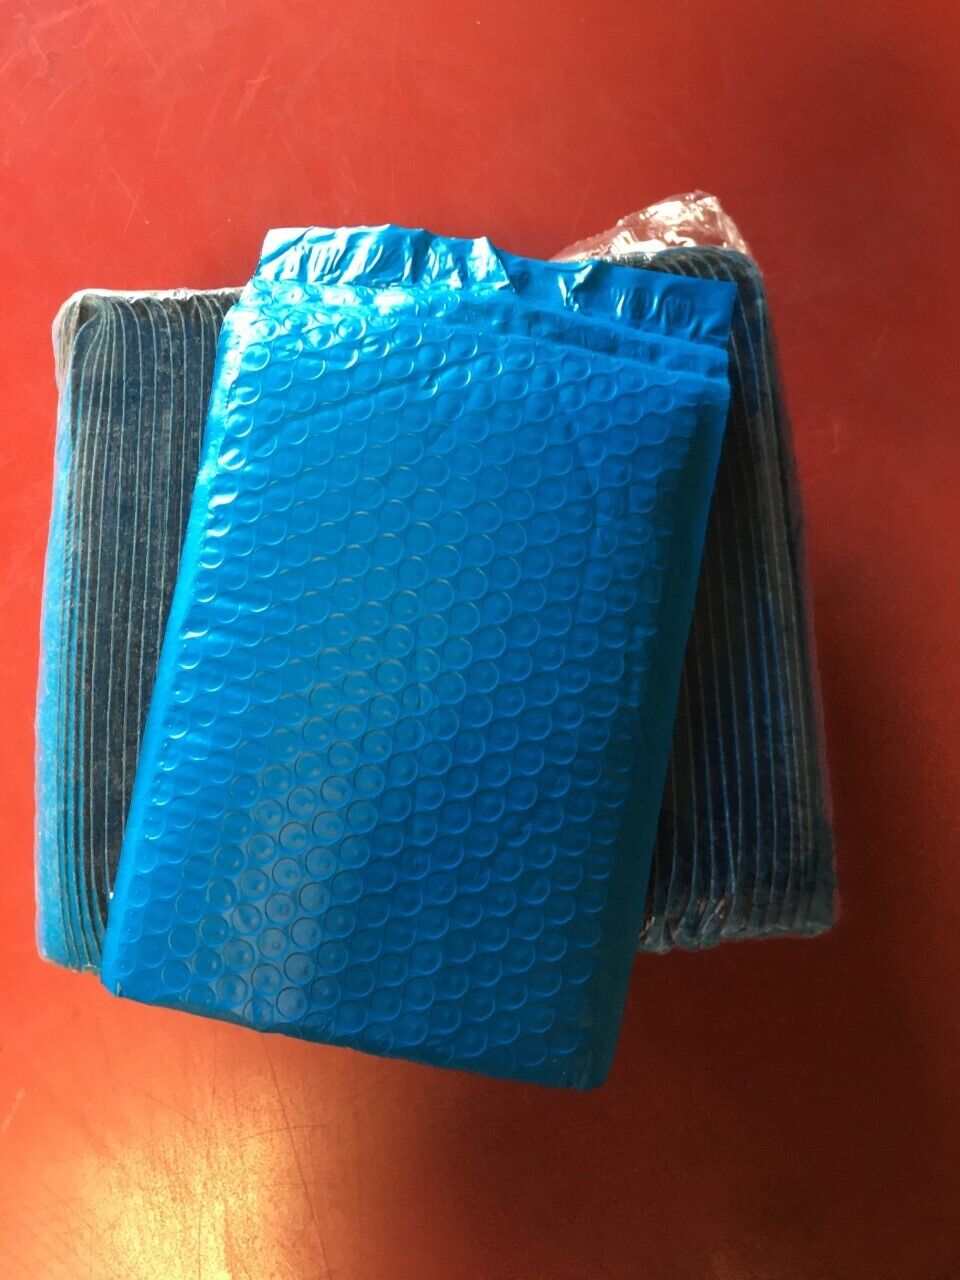 400 #0 6 X 9 Poly Bubble Mailers Padded Envelopes -Blue